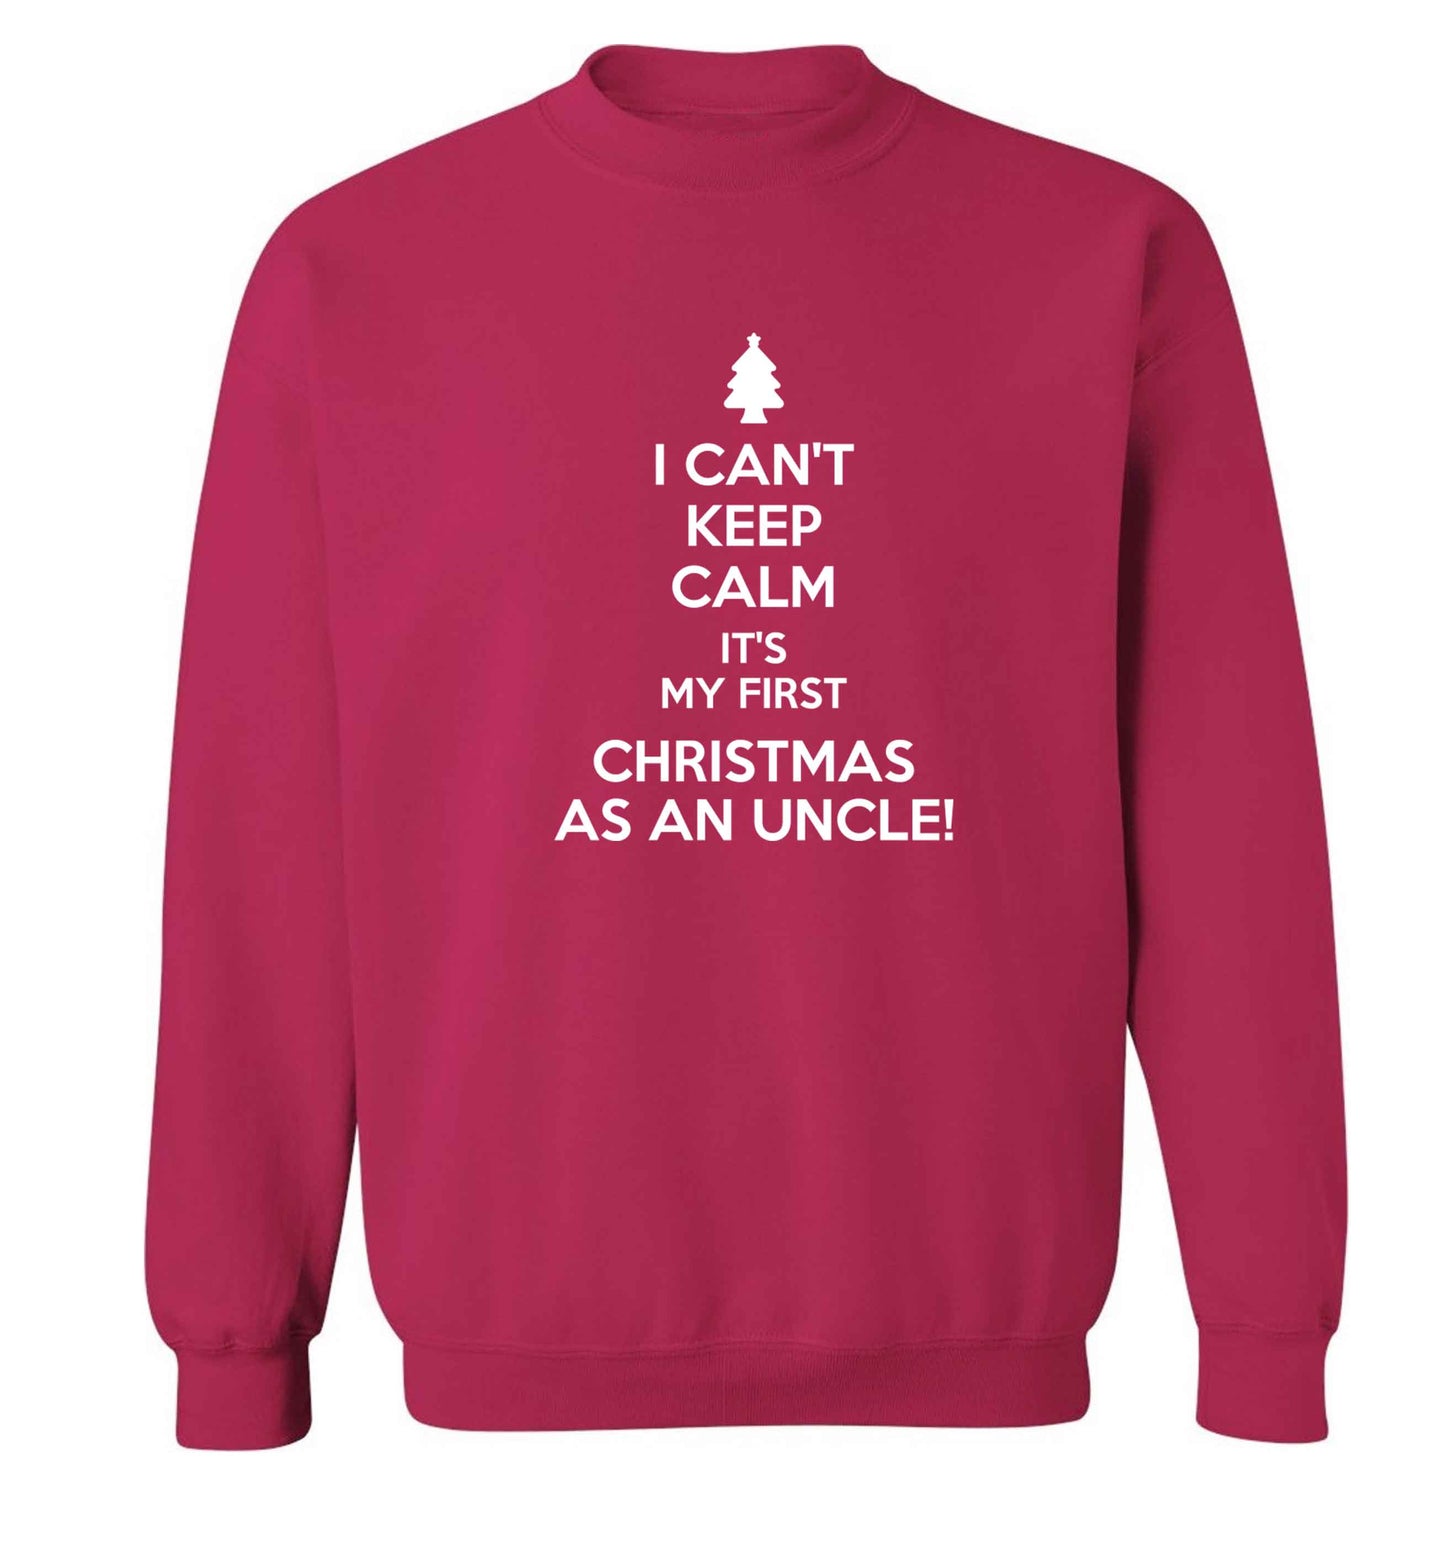 I can't keep calm it's my first Christmas as an uncle! Adult's unisex pink Sweater 2XL